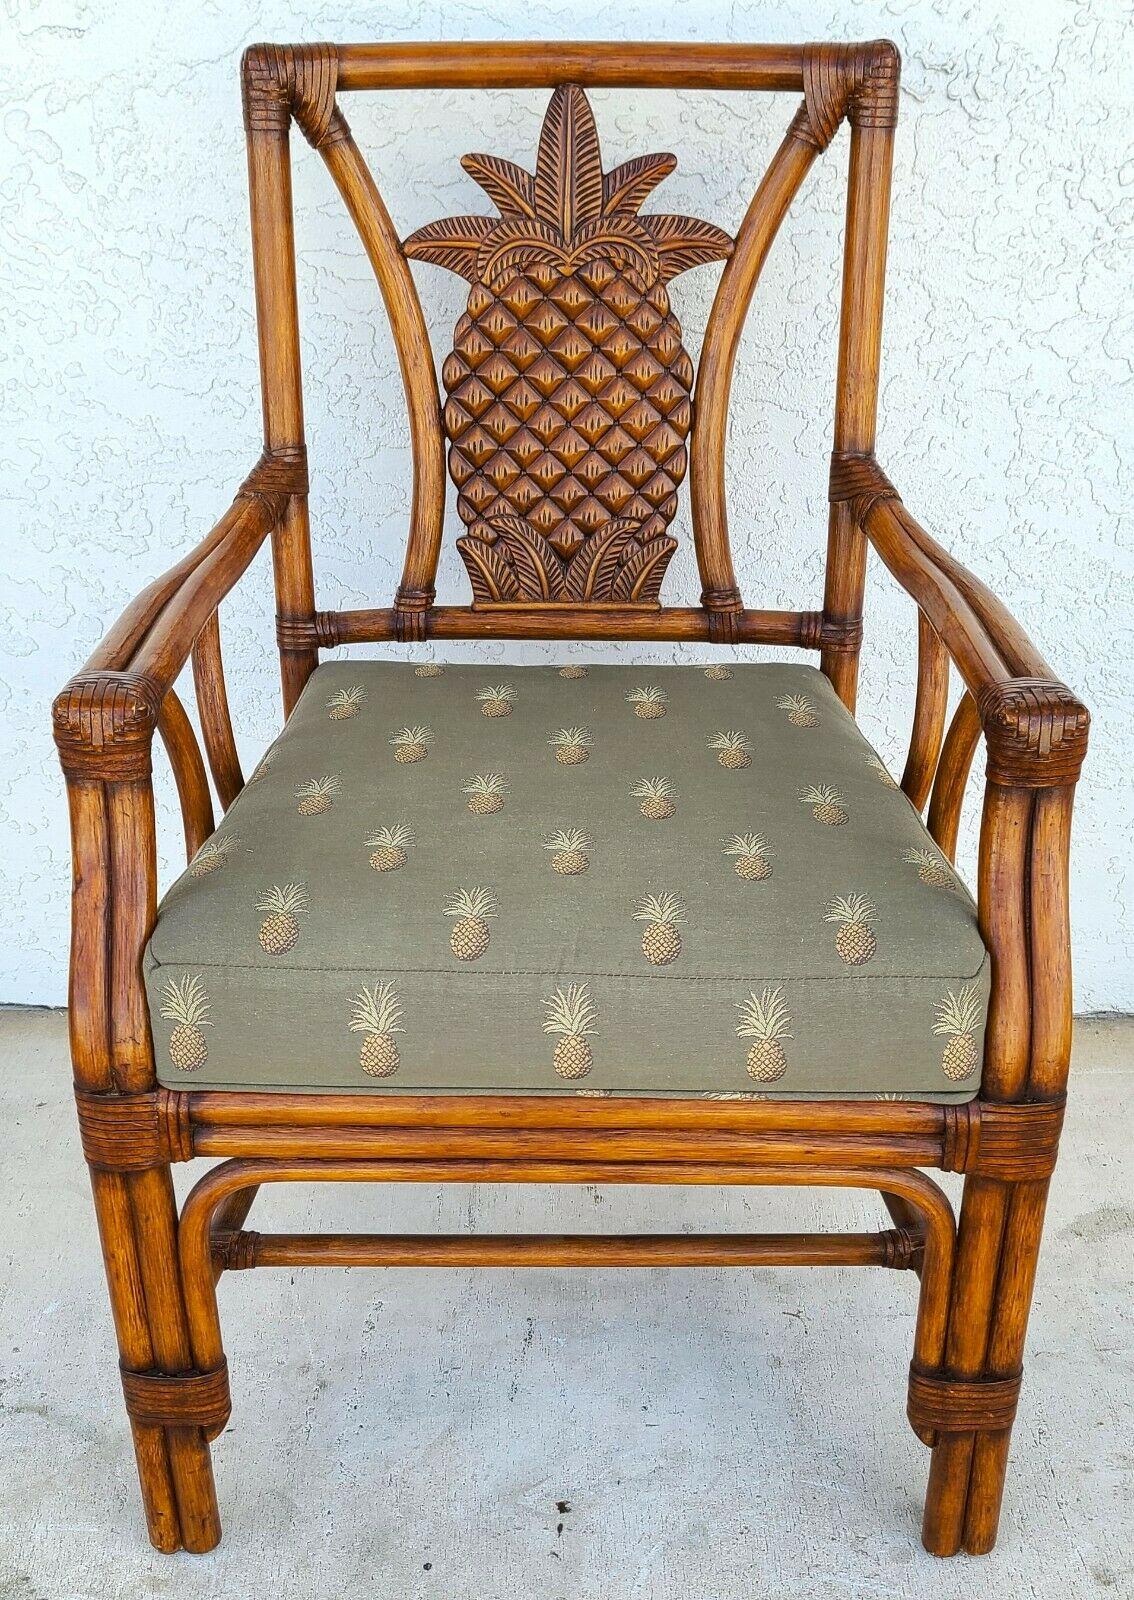 Offering One Of Our Recent Palm Beach Estate Fine Furniture Acquisitions Of A Bamboo Rattan Pineapple Dining Accent Desk Armchair by PALECEK 

This listing and price are for the chair shown in the first 9 photos only. We have many other Palecek